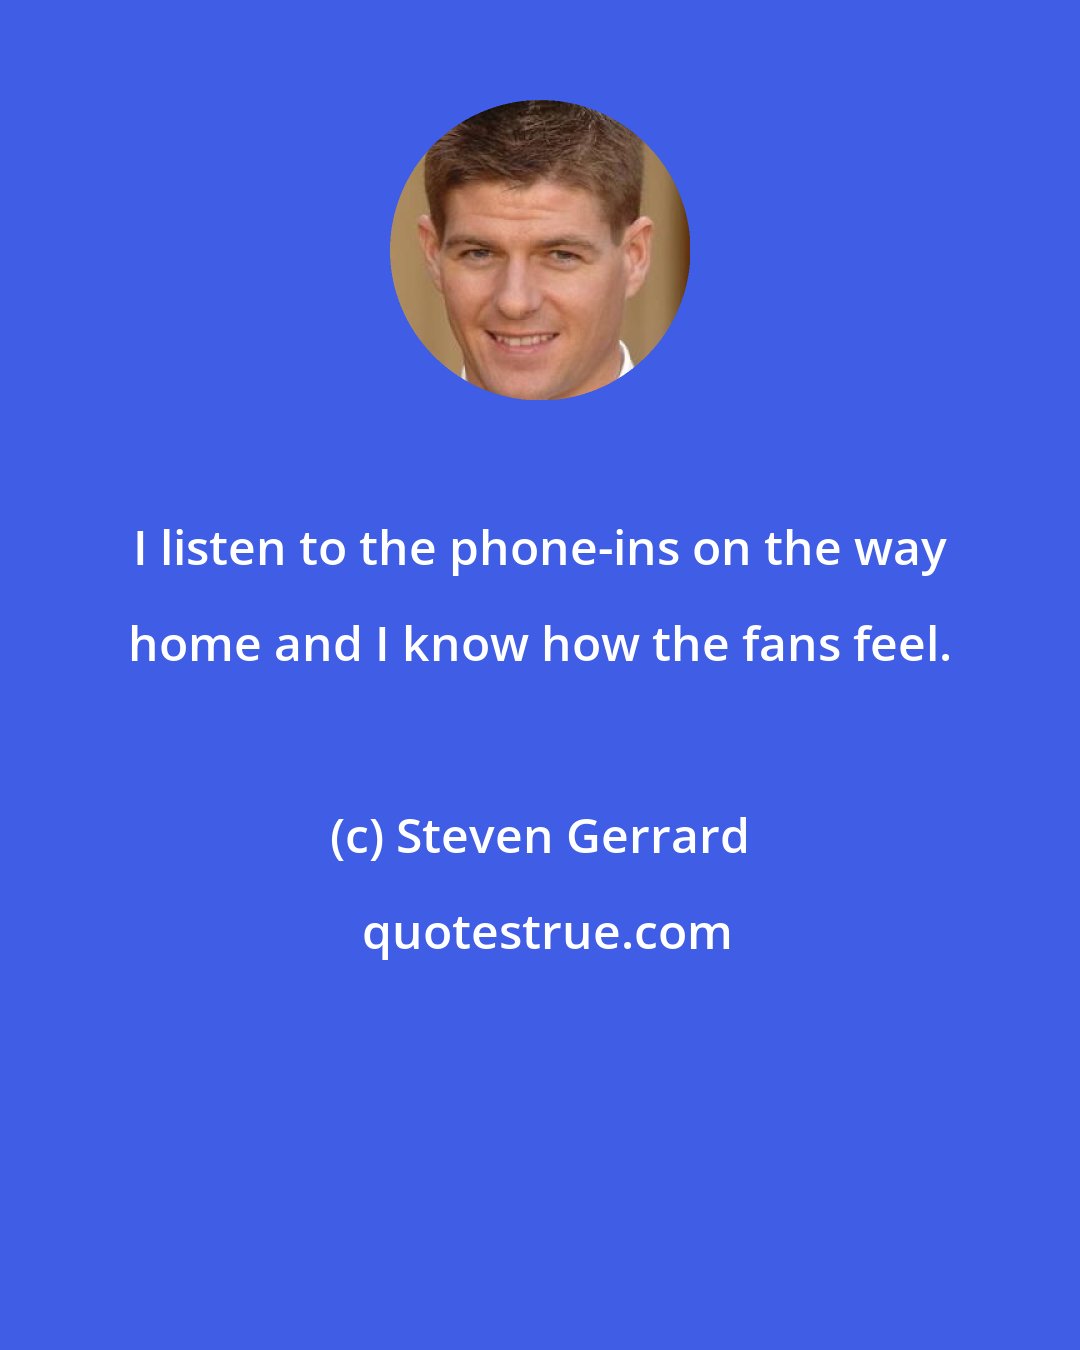 Steven Gerrard: I listen to the phone-ins on the way home and I know how the fans feel.